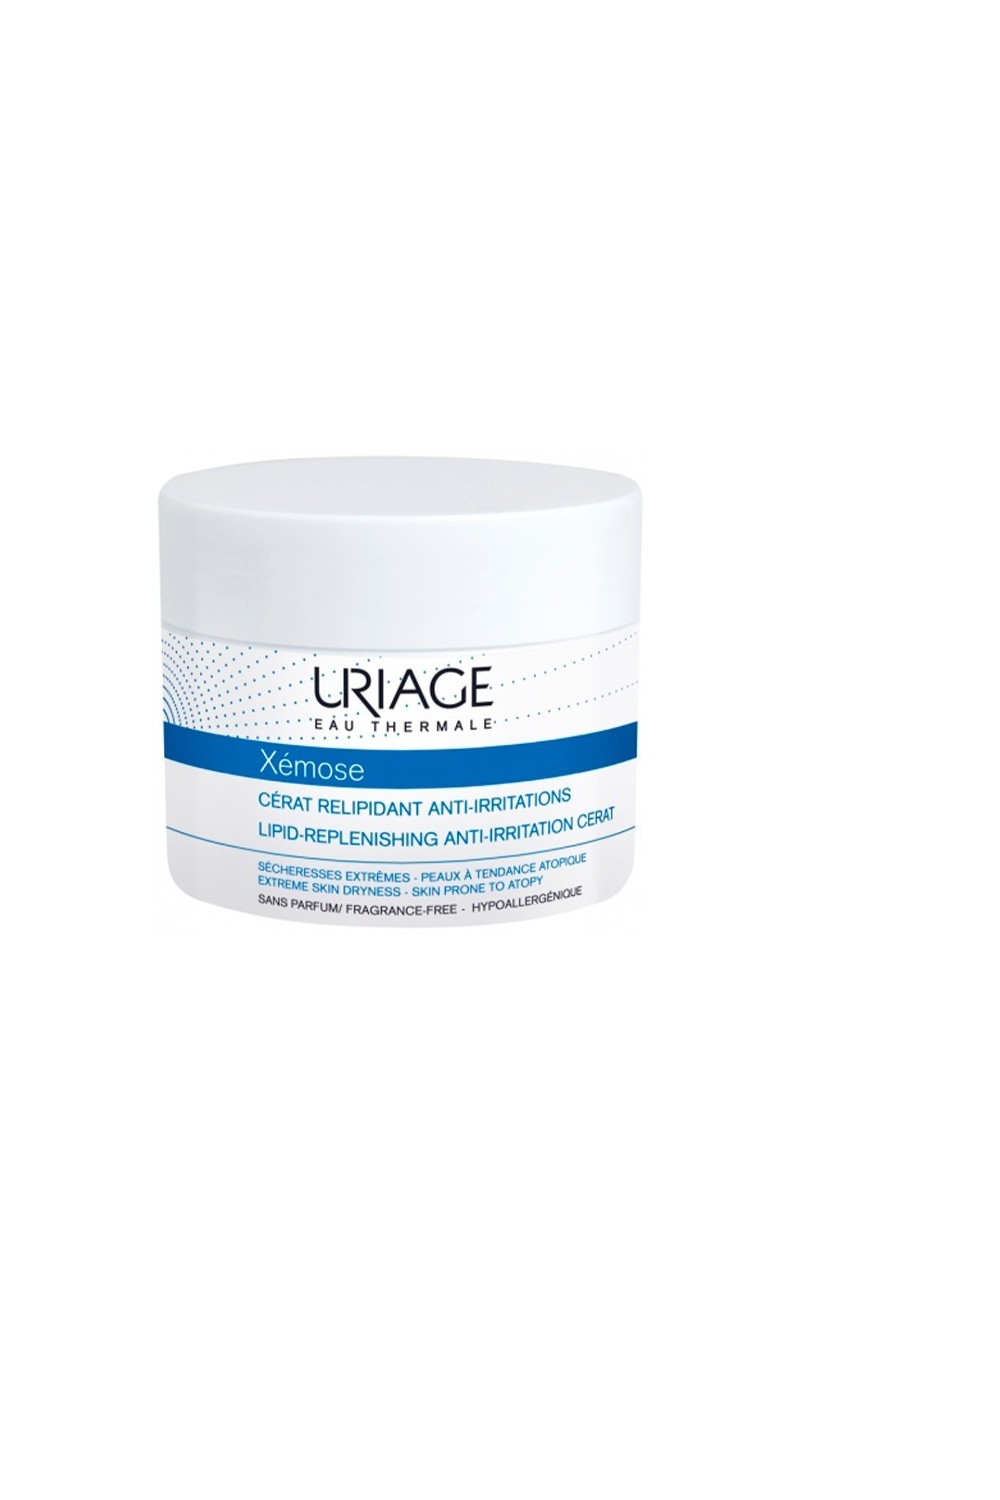 Uriage Xémose Cerato Relipidising Treatment With Soothing Properties 200ml